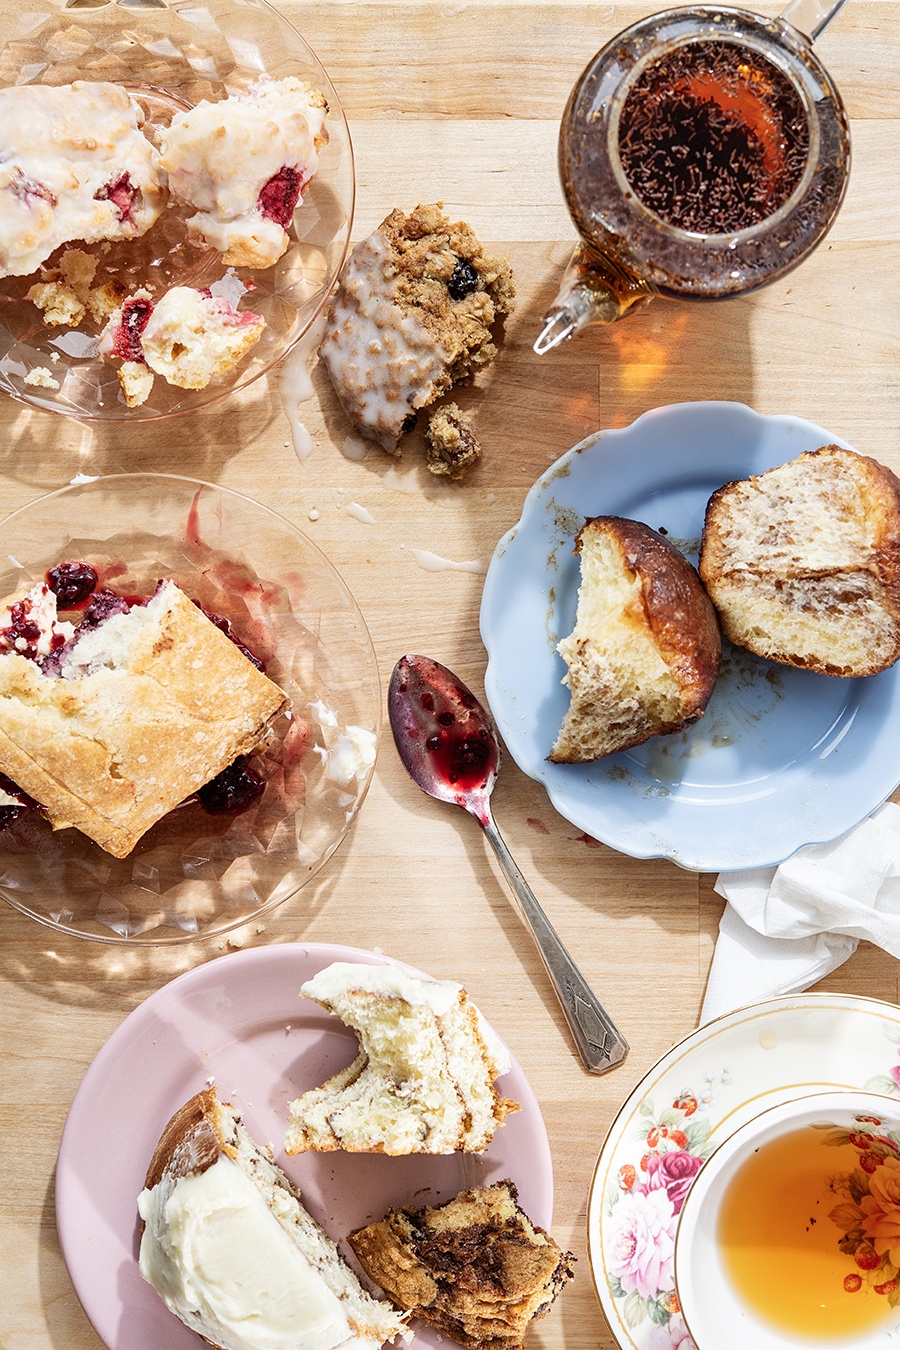 Overhead view of plates of partially eaten pastries, a floral cup of tea, and a glass teapot.